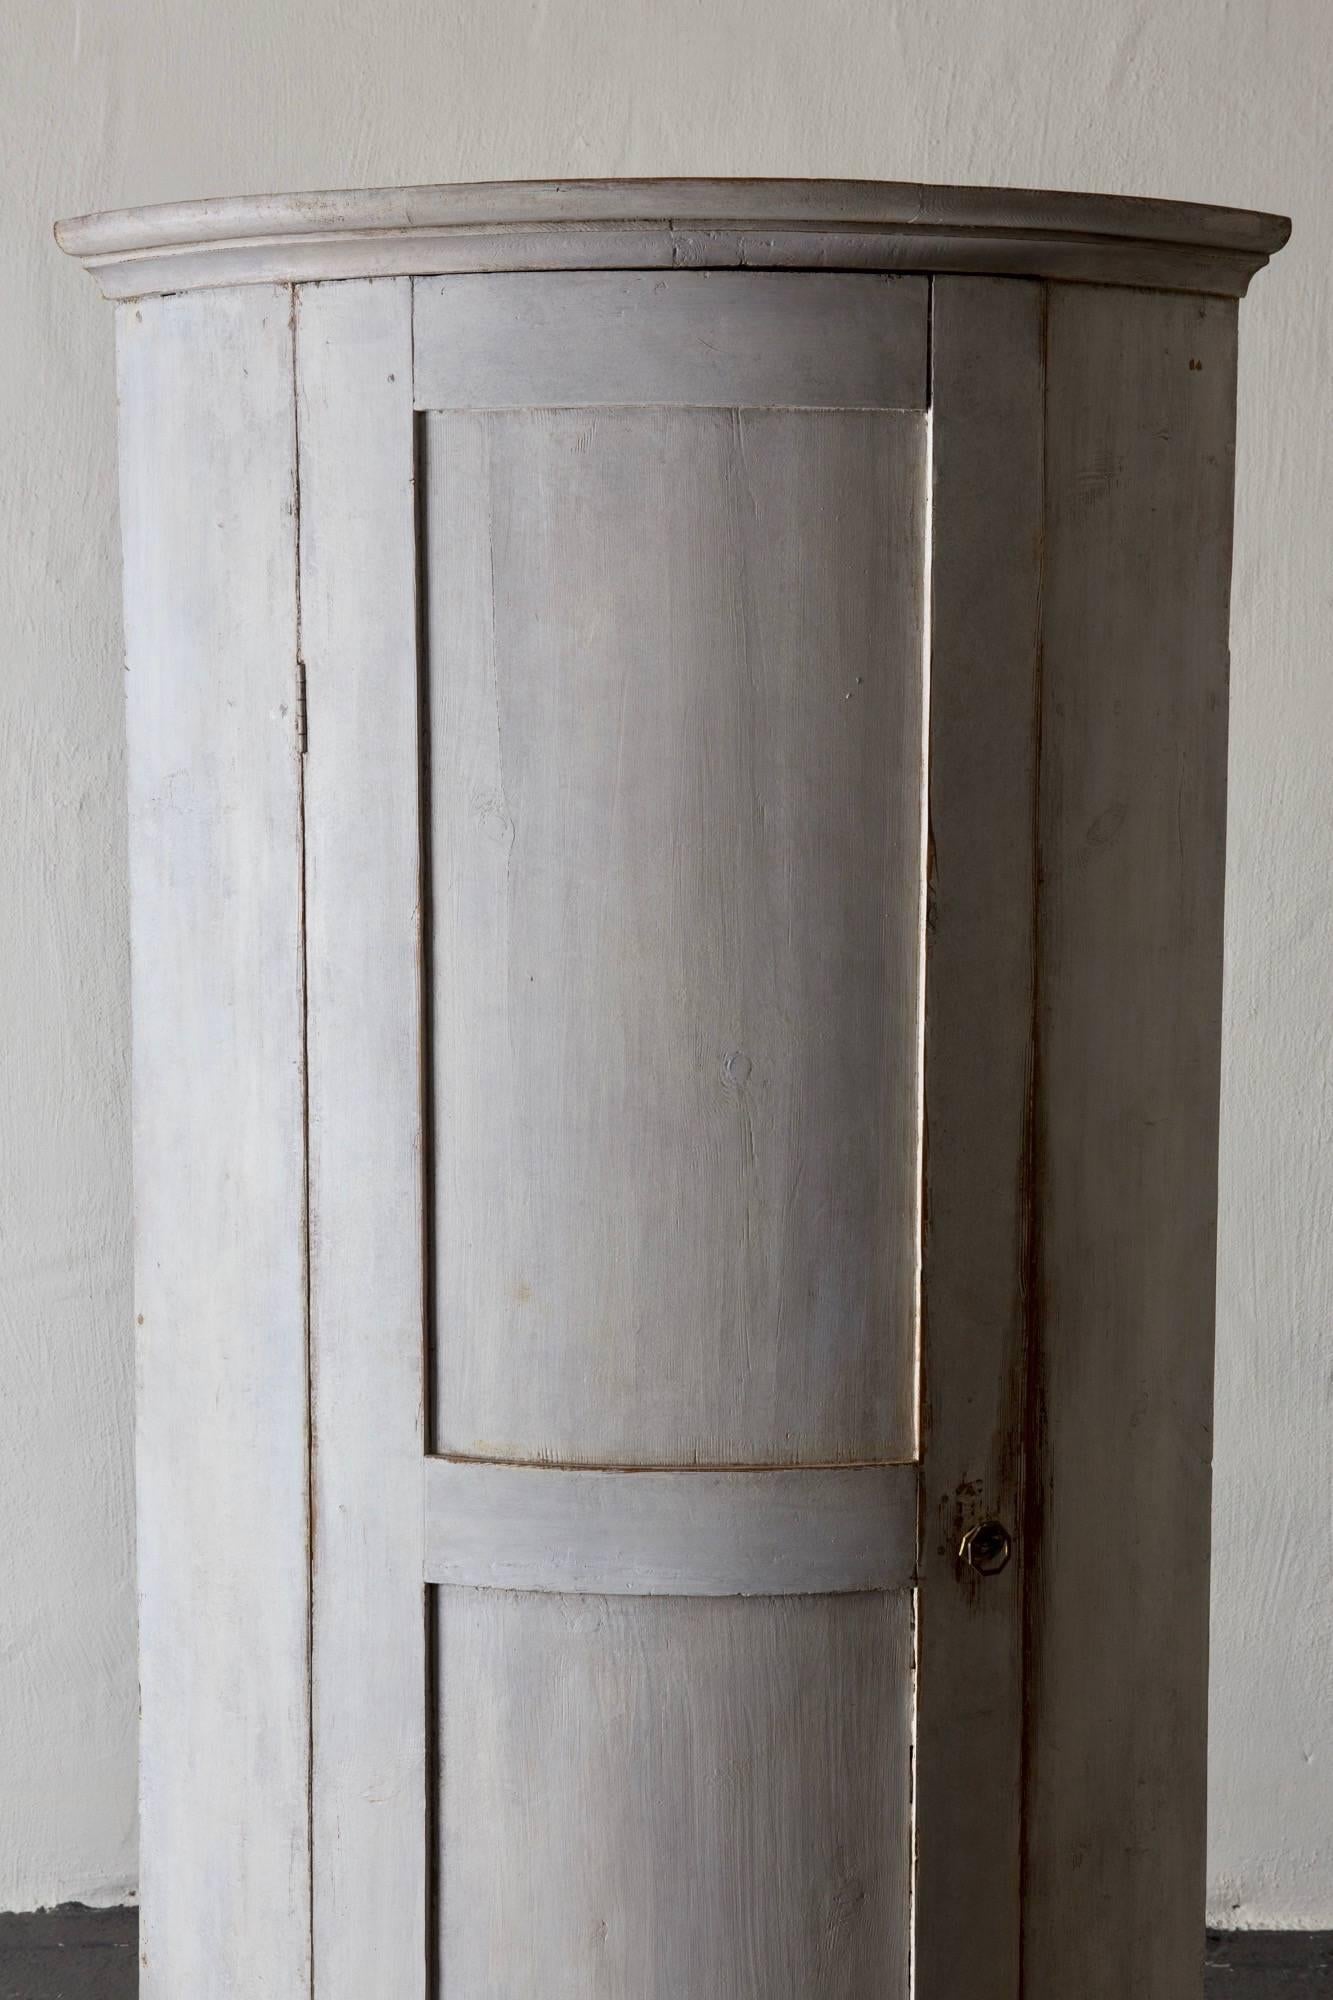 A corner cabinet made during the Gustavian period and early 19th century in Sweden. White distressed finish with a dark gray inside. Both finishes have been restored. Legs have also been restored. 